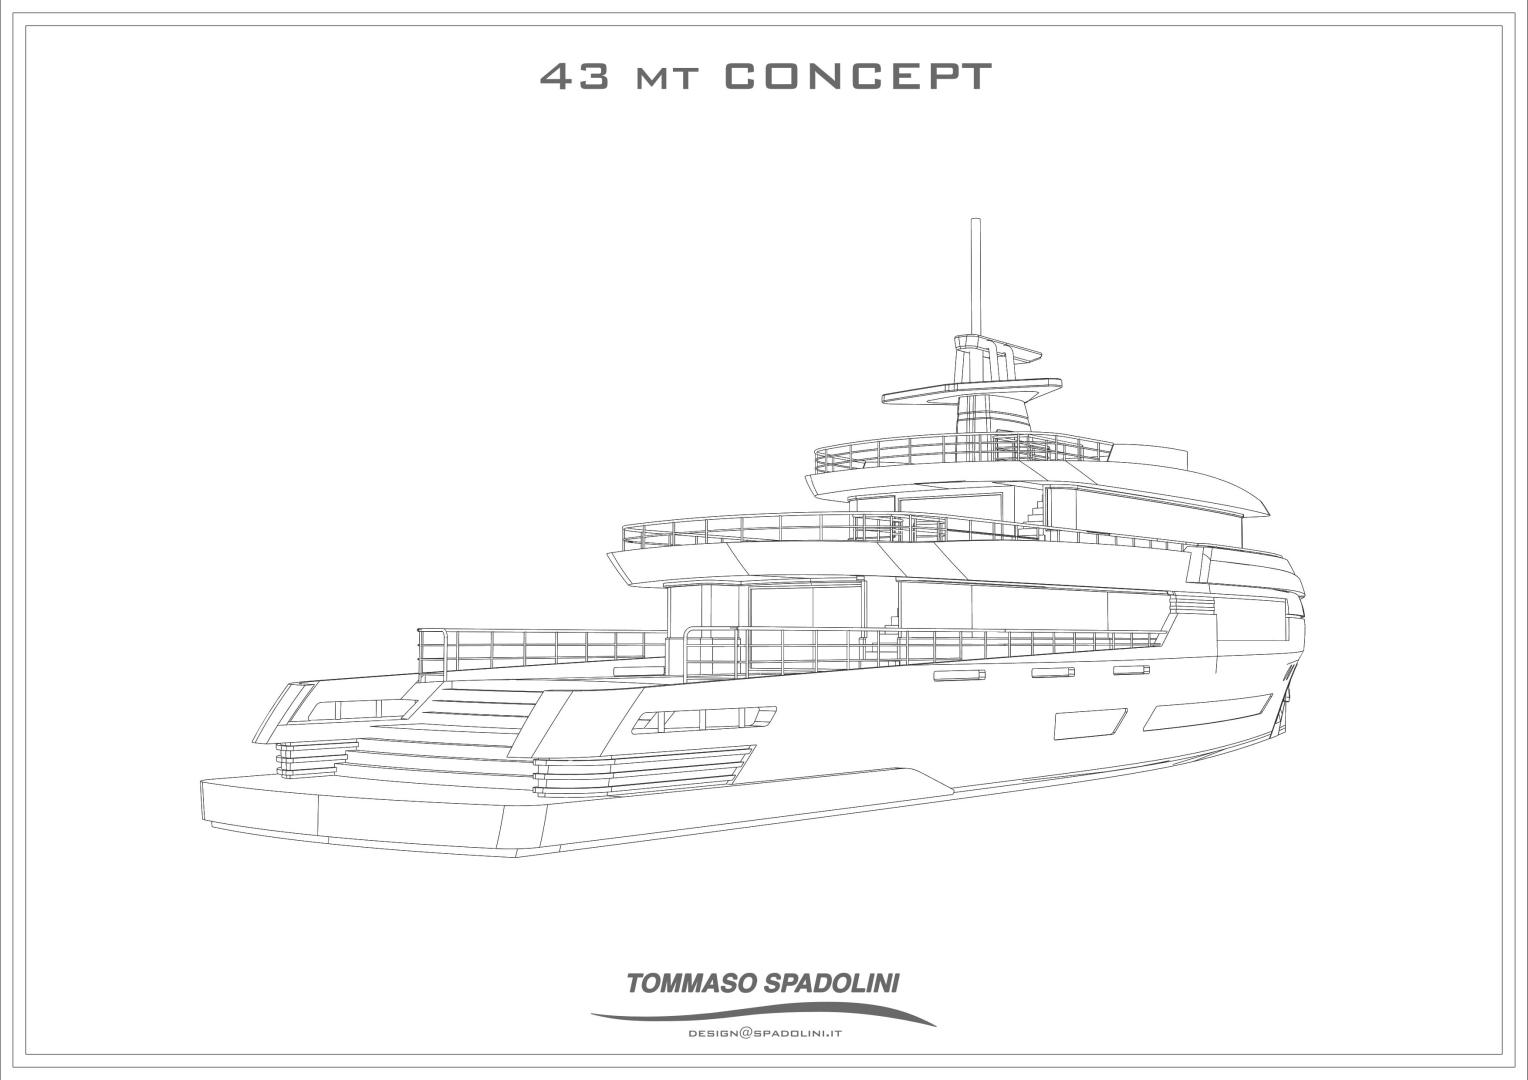 Spadolini reveals a new design project for an experienced owner